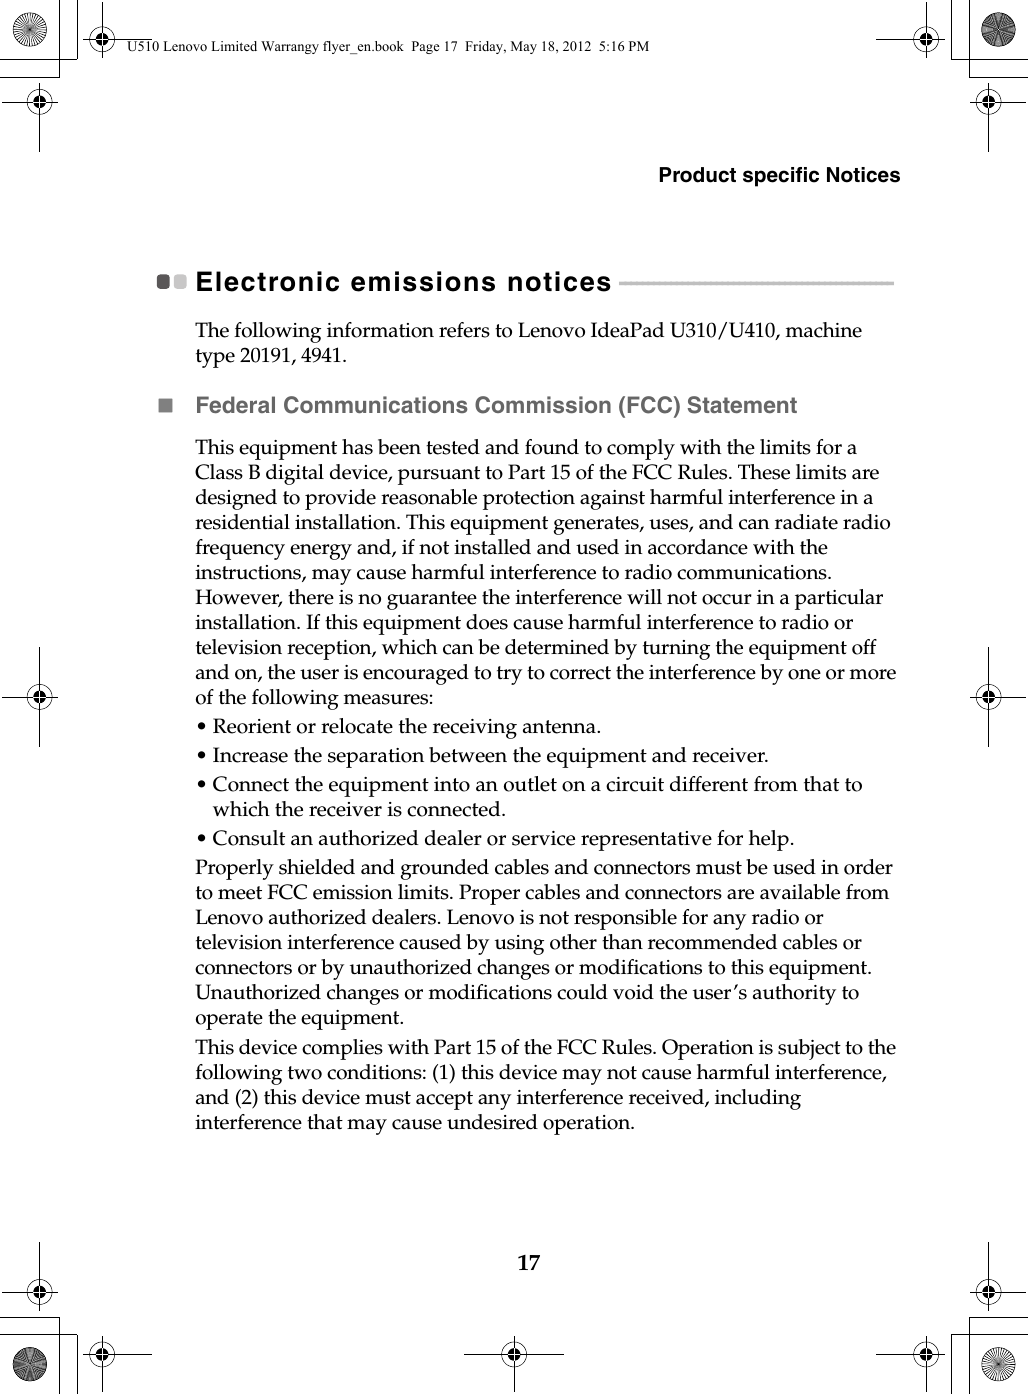 Product specific Notices17Electronic emissions notices - - - - - - - - - - - - - - - - - - - - - - - - - - - - - - - - - - - - - - - - - - - - - - - - The following information refers to Lenovo IdeaPad U310/U410, machine type 20191, 4941.Federal Communications Commission (FCC) StatementThis equipment has been tested and found to comply with the limits for a Class B digital device, pursuant to Part 15 of the FCC Rules. These limits are designed to provide reasonable protection against harmful interference in a residential installation. This equipment generates, uses, and can radiate radio frequency energy and, if not installed and used in accordance with the instructions, may cause harmful interference to radio communications. However, there is no guarantee the interference will not occur in a particular installation. If this equipment does cause harmful interference to radio or television reception, which can be determined by turning the equipment off and on, the user is encouraged to try to correct the interference by one or more of the following measures:• Reorient or relocate the receiving antenna.• Increase the separation between the equipment and receiver.• Connect the equipment into an outlet on a circuit different from that to which the receiver is connected.• Consult an authorized dealer or service representative for help.Properly shielded and grounded cables and connectors must be used in order to meet FCC emission limits. Proper cables and connectors are available from Lenovo authorized dealers. Lenovo is not responsible for any radio or television interference caused by using other than recommended cables or connectors or by unauthorized changes or modifications to this equipment. Unauthorized changes or modifications could void the user’s authority to operate the equipment.This device complies with Part 15 of the FCC Rules. Operation is subject to the following two conditions: (1) this device may not cause harmful interference, and (2) this device must accept any interference received, including interference that may cause undesired operation.U510 Lenovo Limited Warrangy flyer_en.book  Page 17  Friday, May 18, 2012  5:16 PM